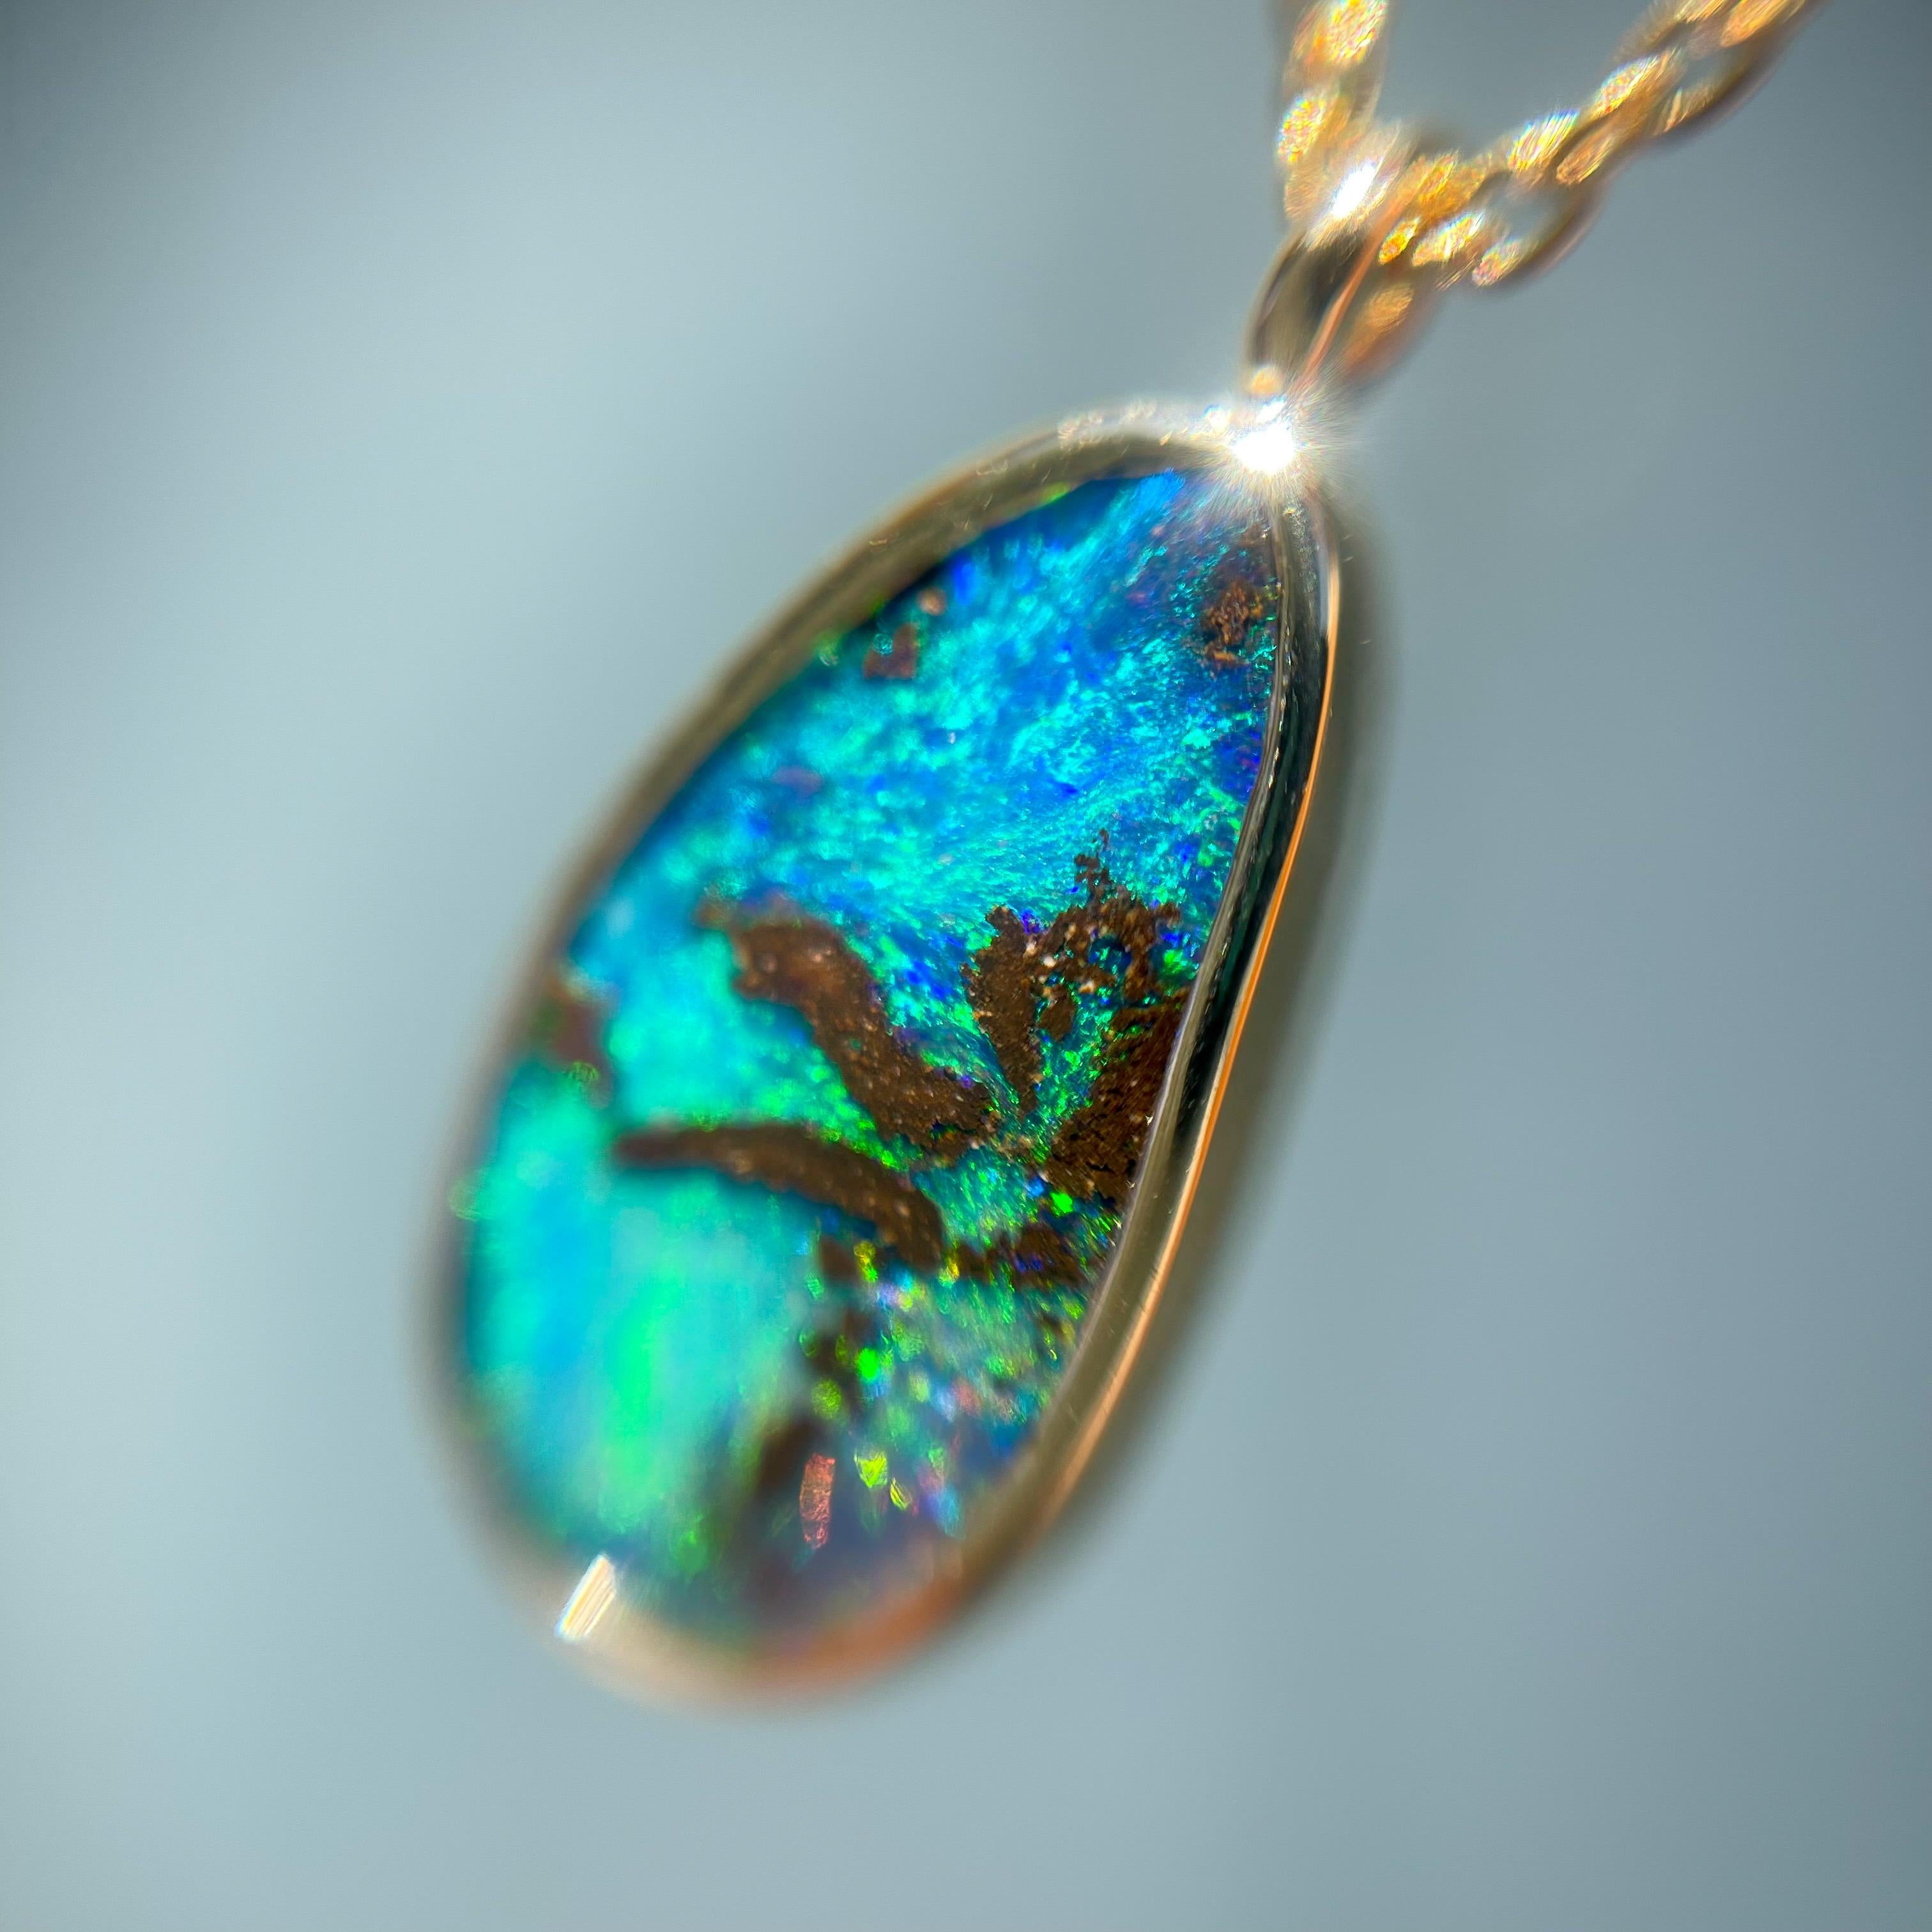 A stunning Australian Opal Necklace evokes the essence of summer. Superimposed upon the natural opal is the likeness of a palm tree atop electric greens and blues. The dark silhouette creates a striking contrast against the intense color gradient of